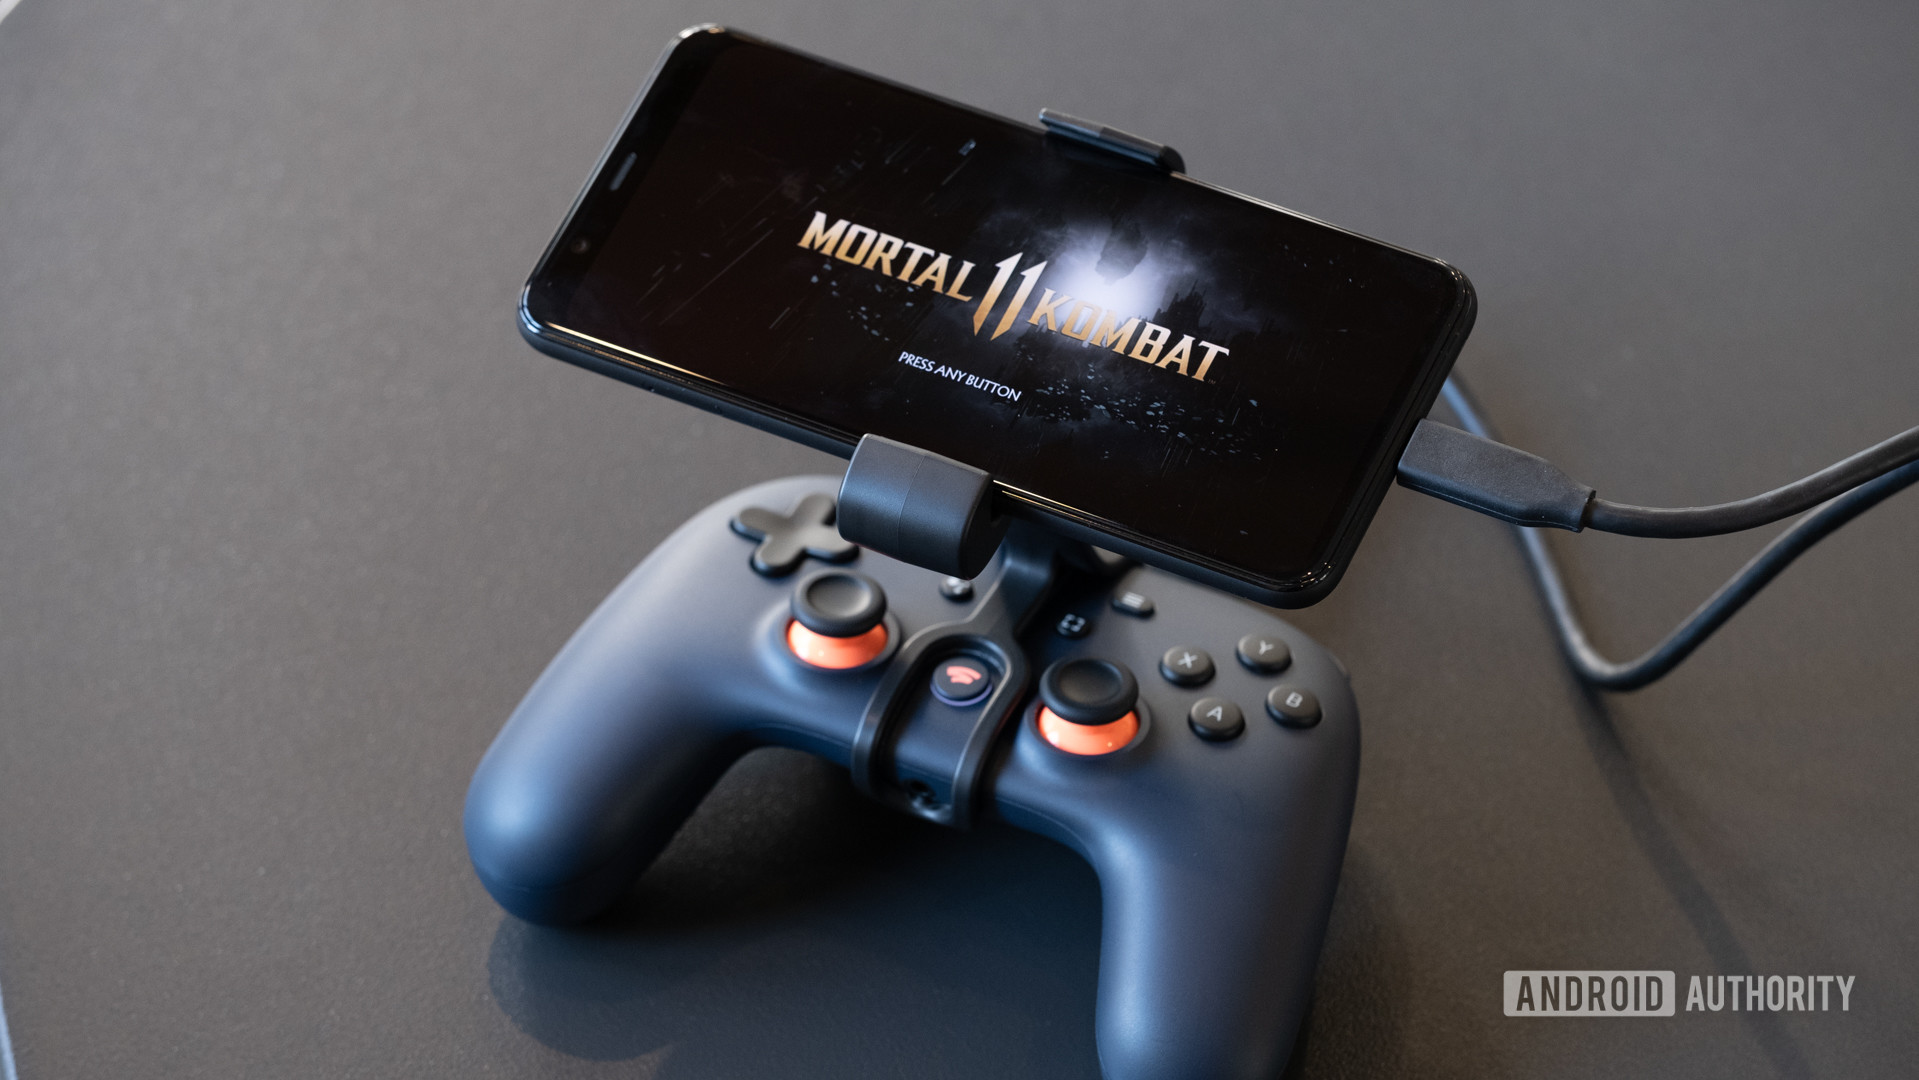 Google Stadia controller with phone mounted showing Mortal Kombat on the screen.